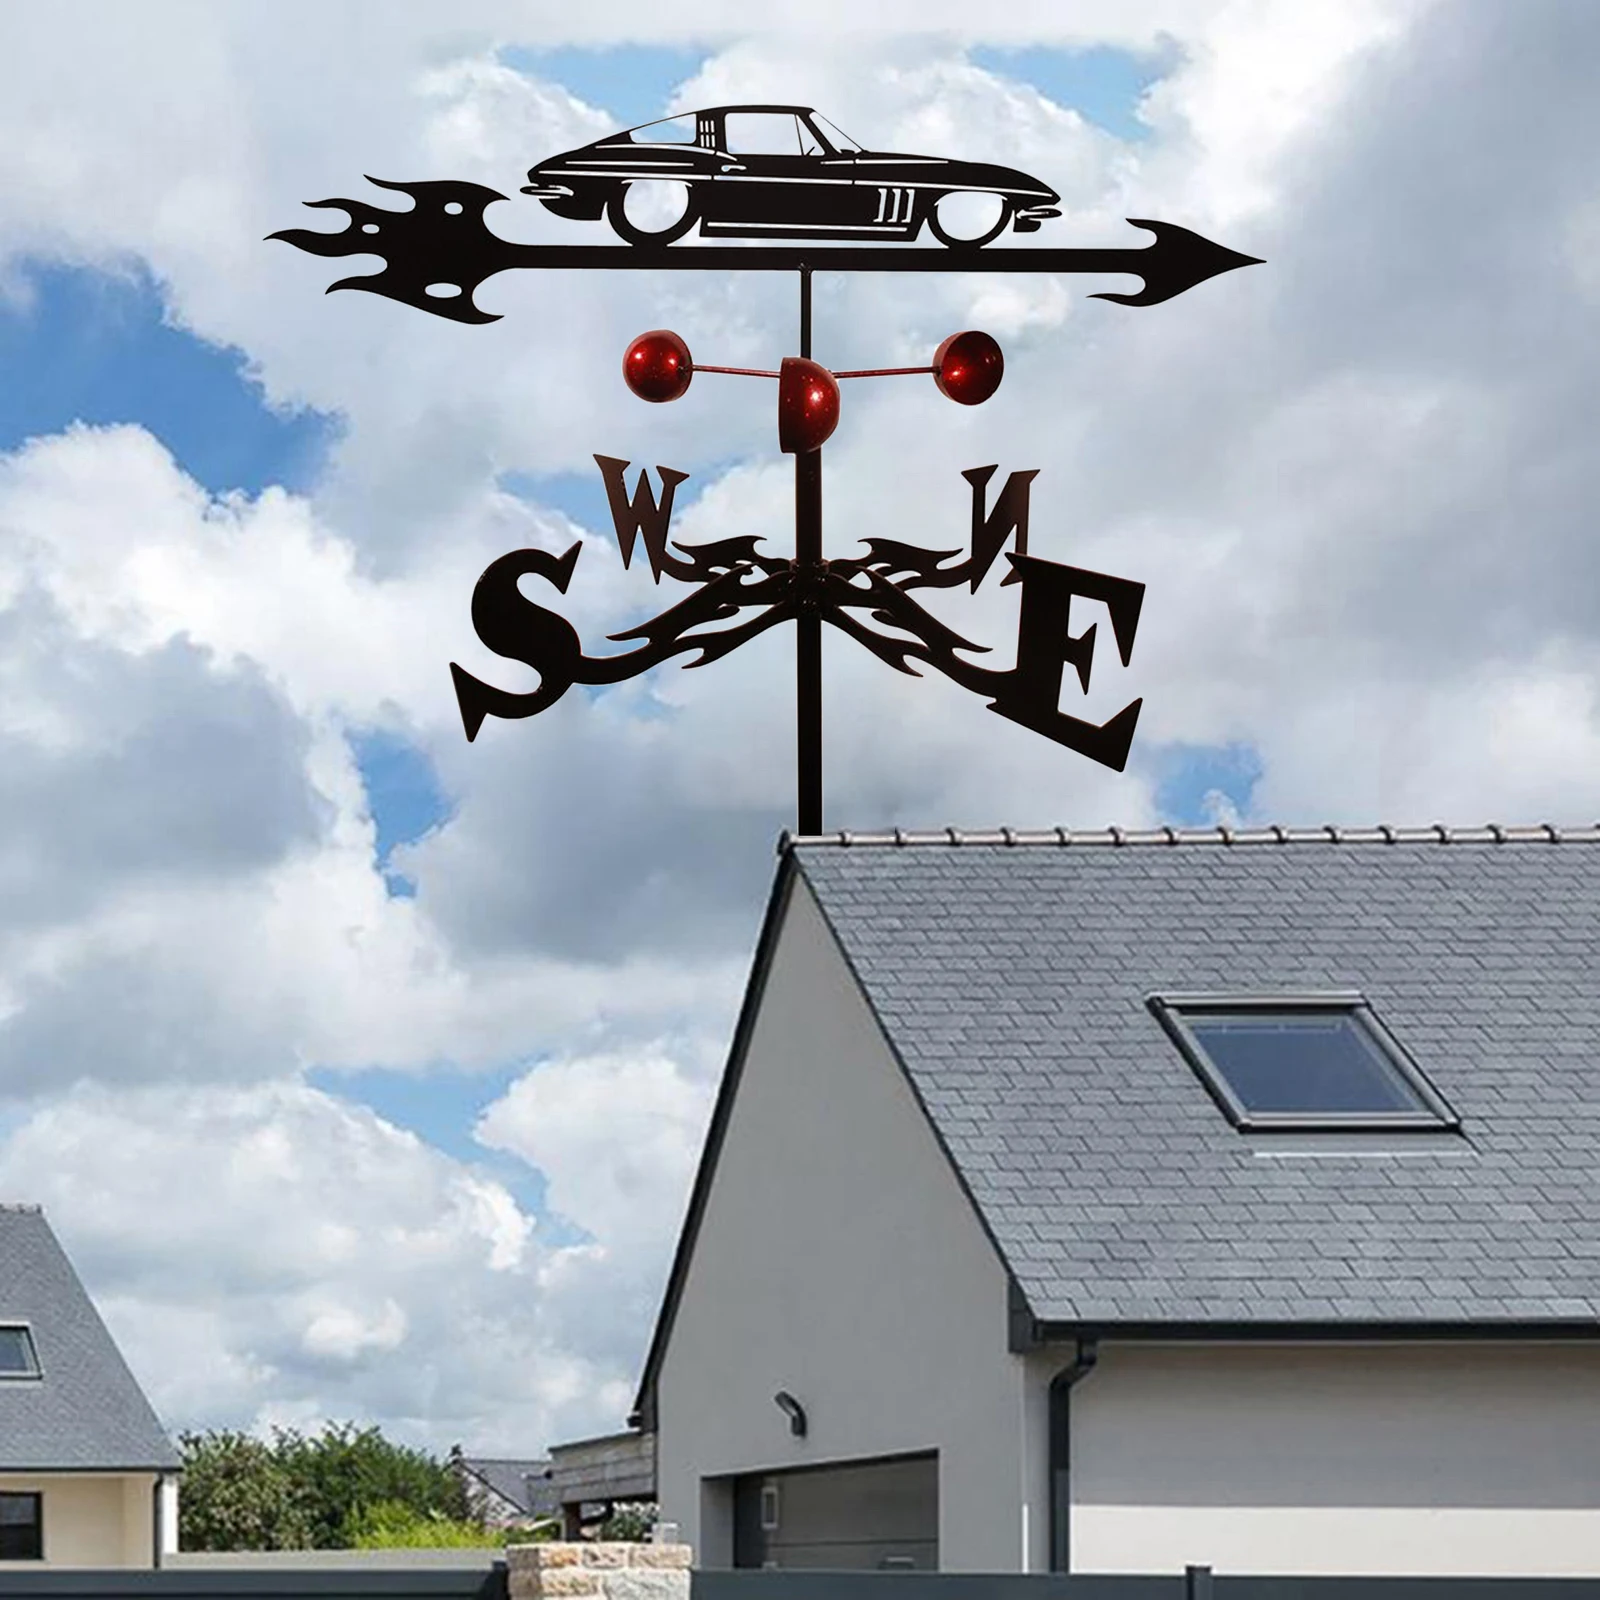 JJDSN Weather Vane for Sheep and Lamb Ornament Metal Weathervane with anti-rust coating Practical Wind Vane Outdoor Roof Garden Decor Yard Wind Direction Indicator 